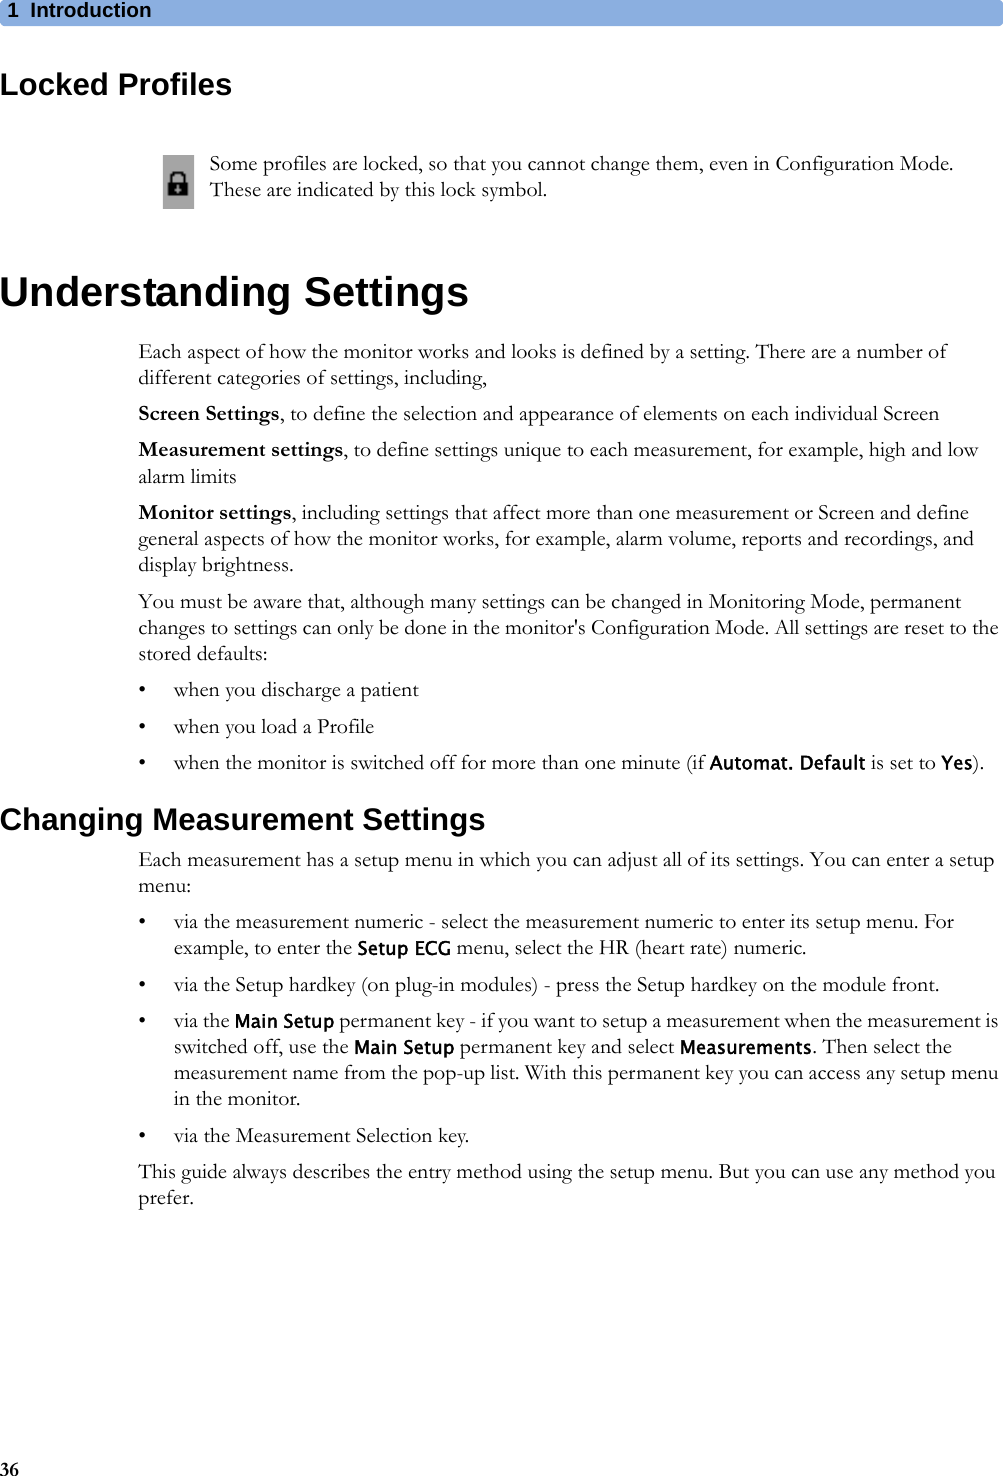 1Introduction36Locked ProfilesUnderstanding SettingsEach aspect of how the monitor works and looks is defined by a setting. There are a number of different categories of settings, including,Screen Settings, to define the selection and appearance of elements on each individual ScreenMeasurement settings, to define settings unique to each measurement, for example, high and low alarm limitsMonitor settings, including settings that affect more than one measurement or Screen and define general aspects of how the monitor works, for example, alarm volume, reports and recordings, and display brightness.You must be aware that, although many settings can be changed in Monitoring Mode, permanent changes to settings can only be done in the monitor&apos;s Configuration Mode. All settings are reset to the stored defaults:• when you discharge a patient• when you load a Profile• when the monitor is switched off for more than one minute (if Automat. Default is set to Yes).Changing Measurement SettingsEach measurement has a setup menu in which you can adjust all of its settings. You can enter a setup menu:• via the measurement numeric - select the measurement numeric to enter its setup menu. For example, to enter the Setup ECG menu, select the HR (heart rate) numeric.• via the Setup hardkey (on plug-in modules) - press the Setup hardkey on the module front.•via the Main Setup permanent key - if you want to setup a measurement when the measurement is switched off, use the Main Setup permanent key and select Measurements. Then select the measurement name from the pop-up list. With this permanent key you can access any setup menu in the monitor.• via the Measurement Selection key.This guide always describes the entry method using the setup menu. But you can use any method you prefer.Some profiles are locked, so that you cannot change them, even in Configuration Mode. These are indicated by this lock symbol.